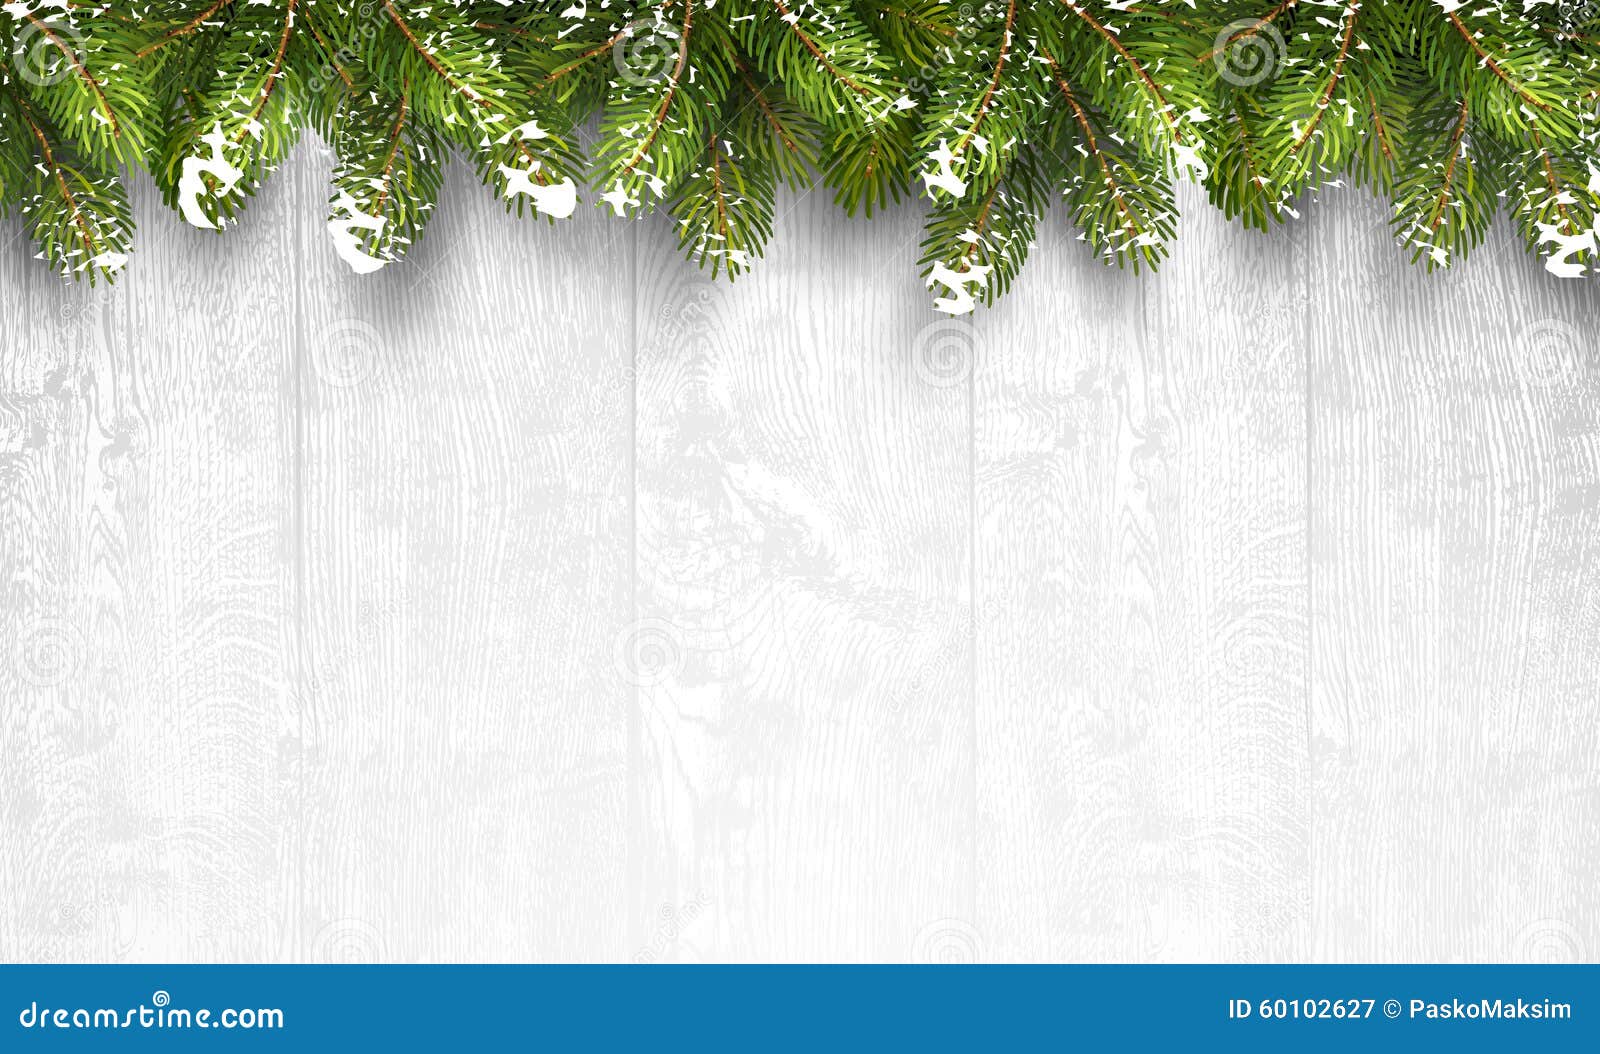 christmas wooden background with fir branches